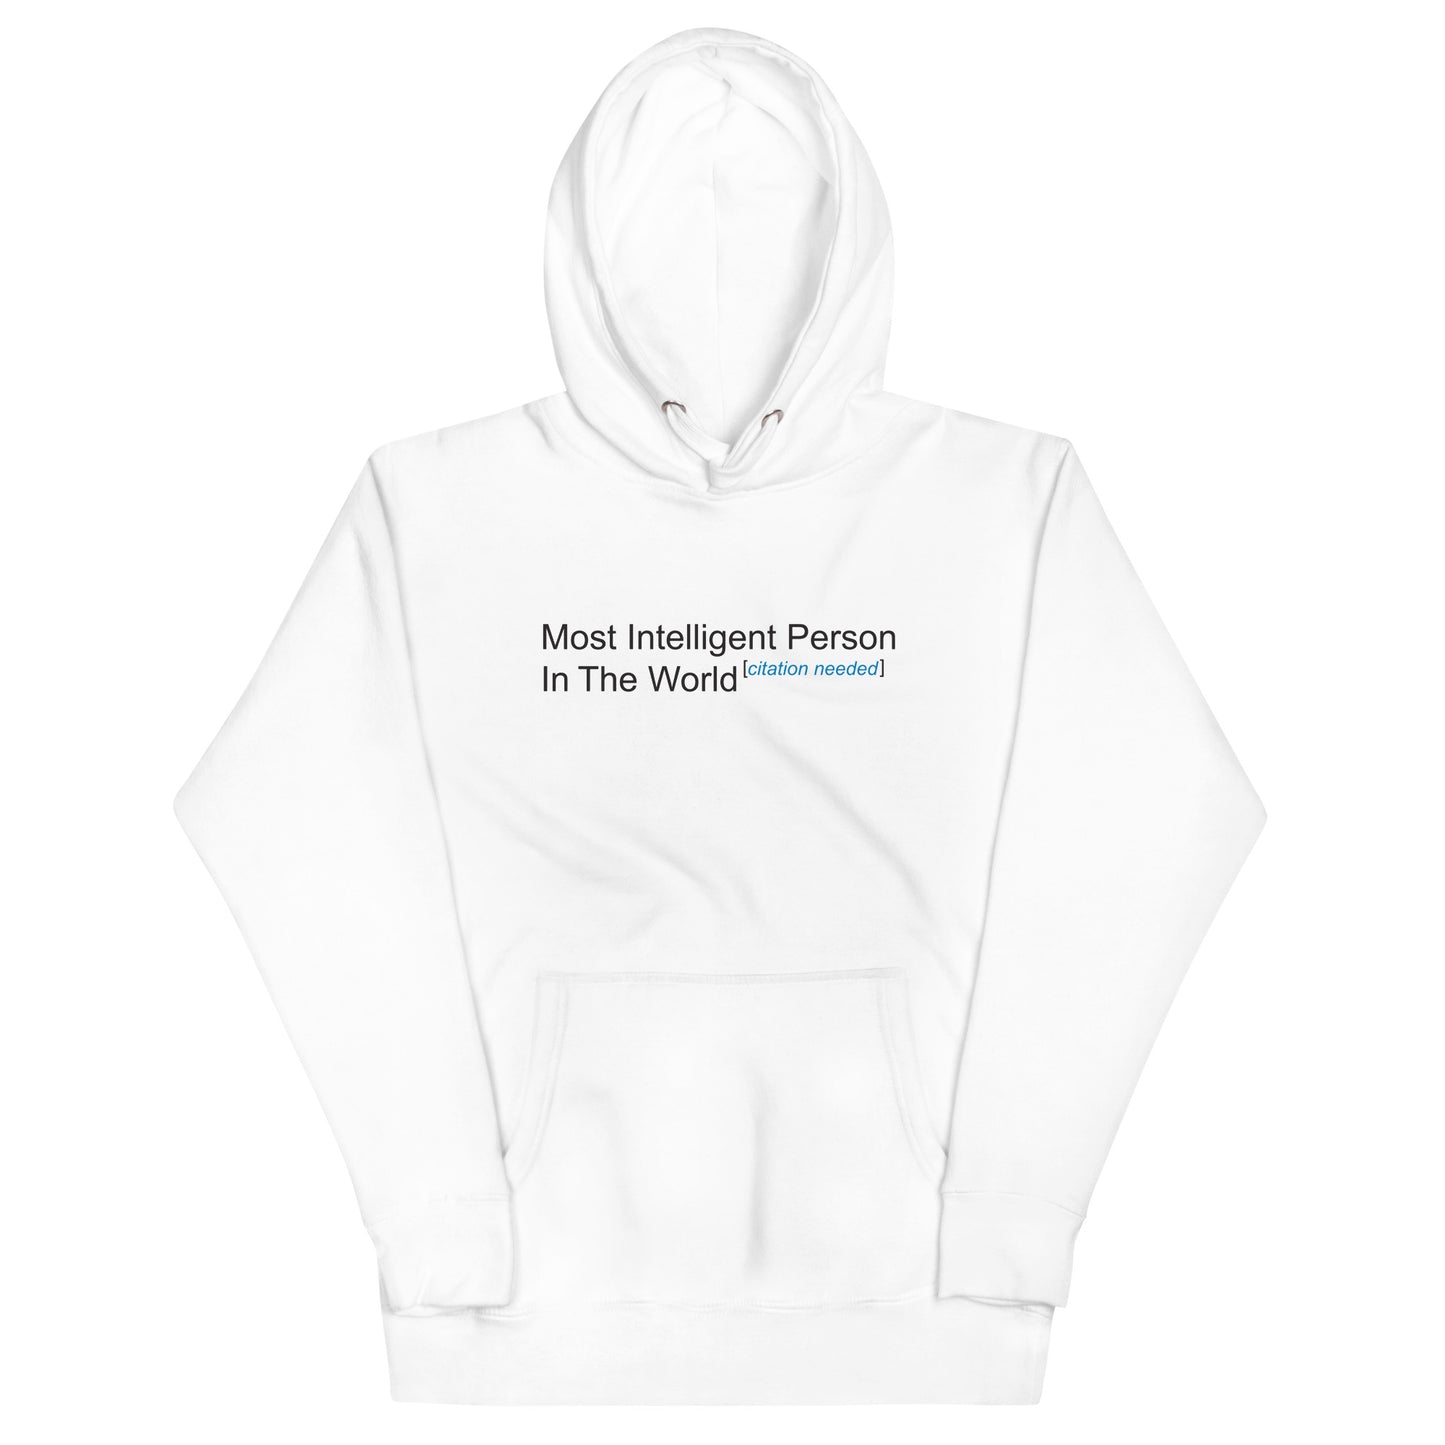 Most Intelligent Person in the World Citation Needed Unisex Hoodie